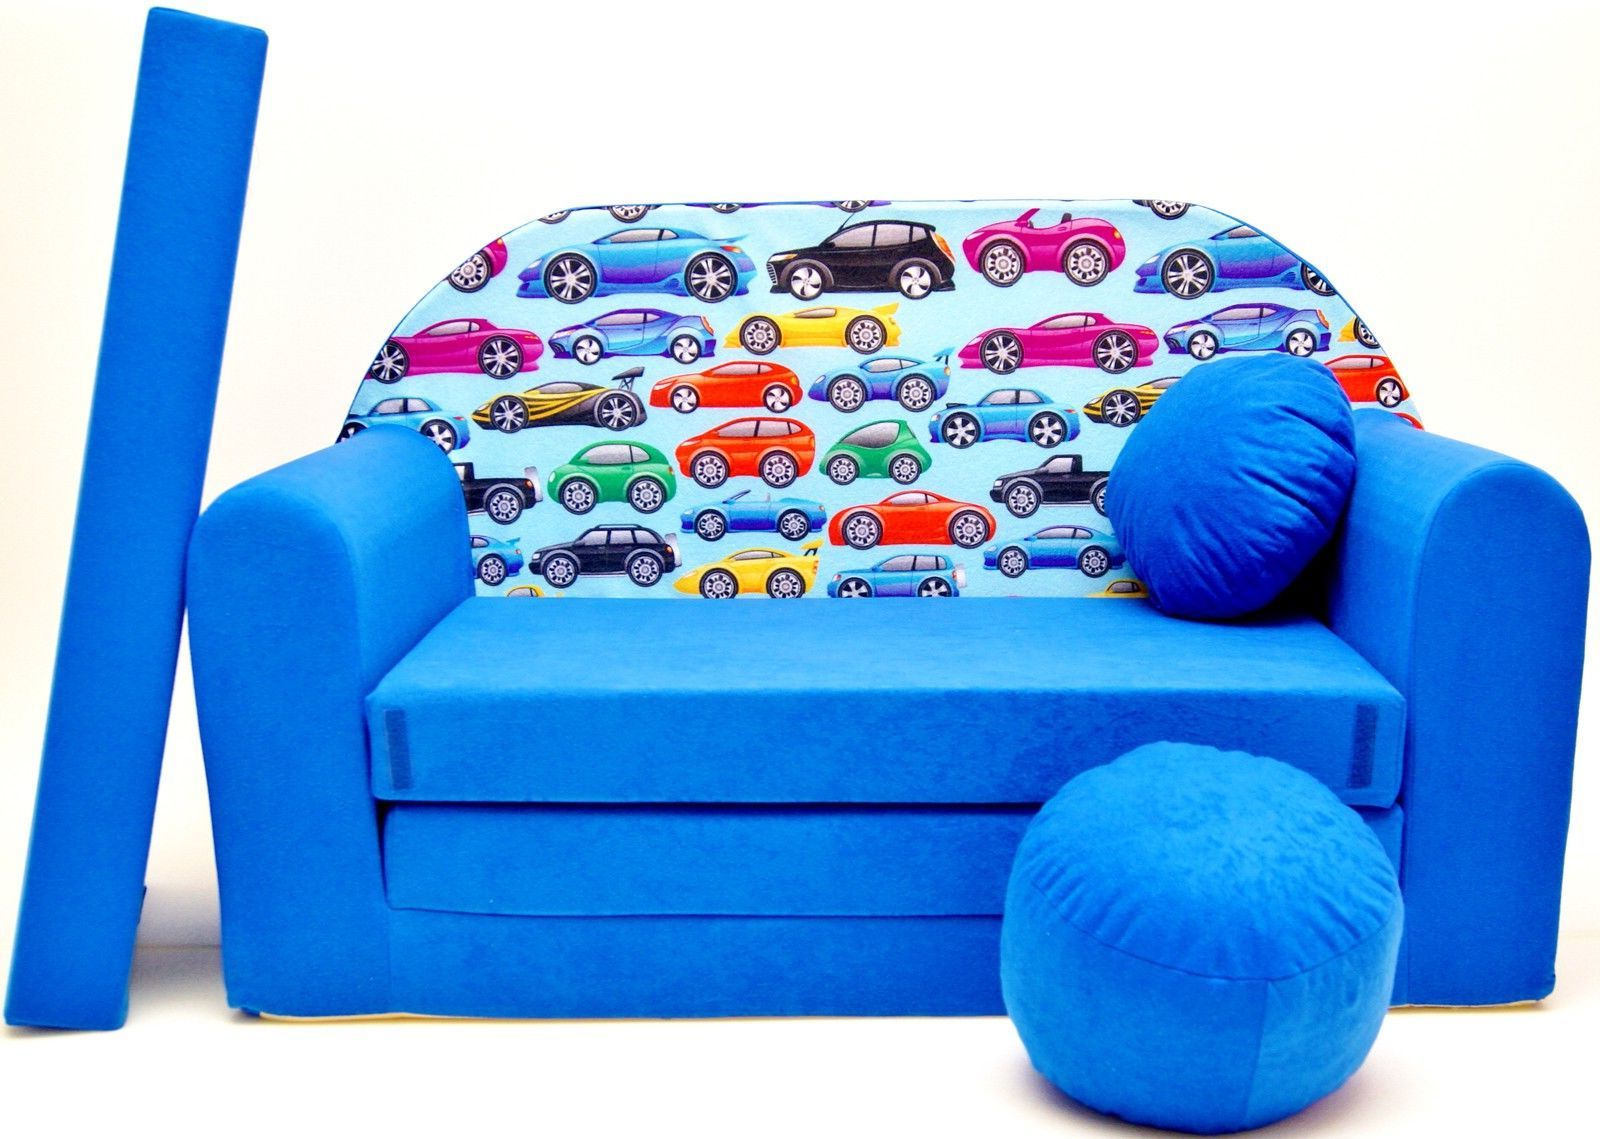 Childrens Sofa Bed Type W, Fold Out Sofa Foam Bed For Children + Free Inside Children's Sofa Beds (View 4 of 20)